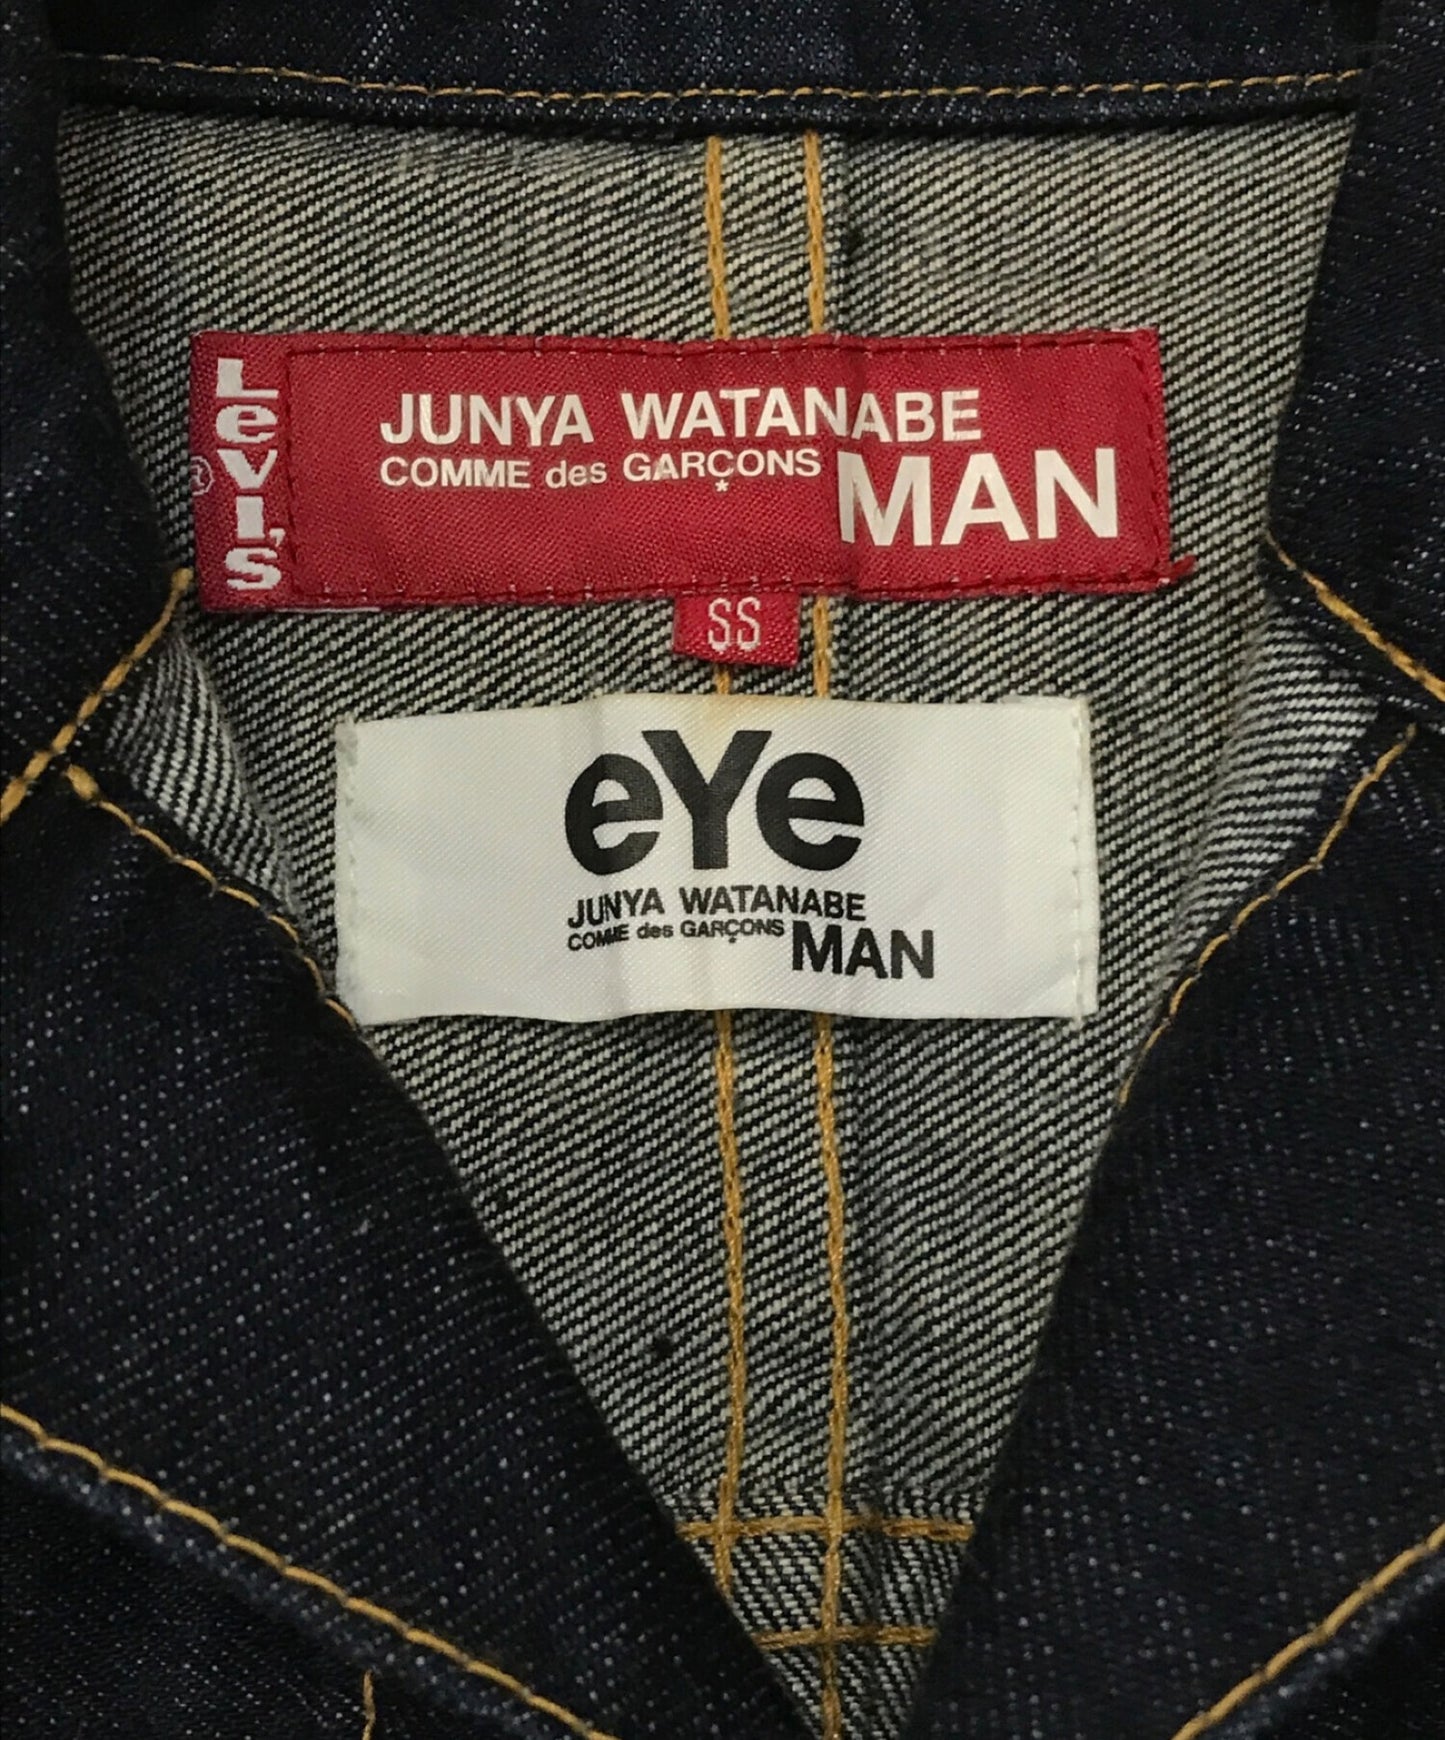 Eye Comme Des Garcons Junyawatanabe Man Leather Switched Coveryall Wa-J901